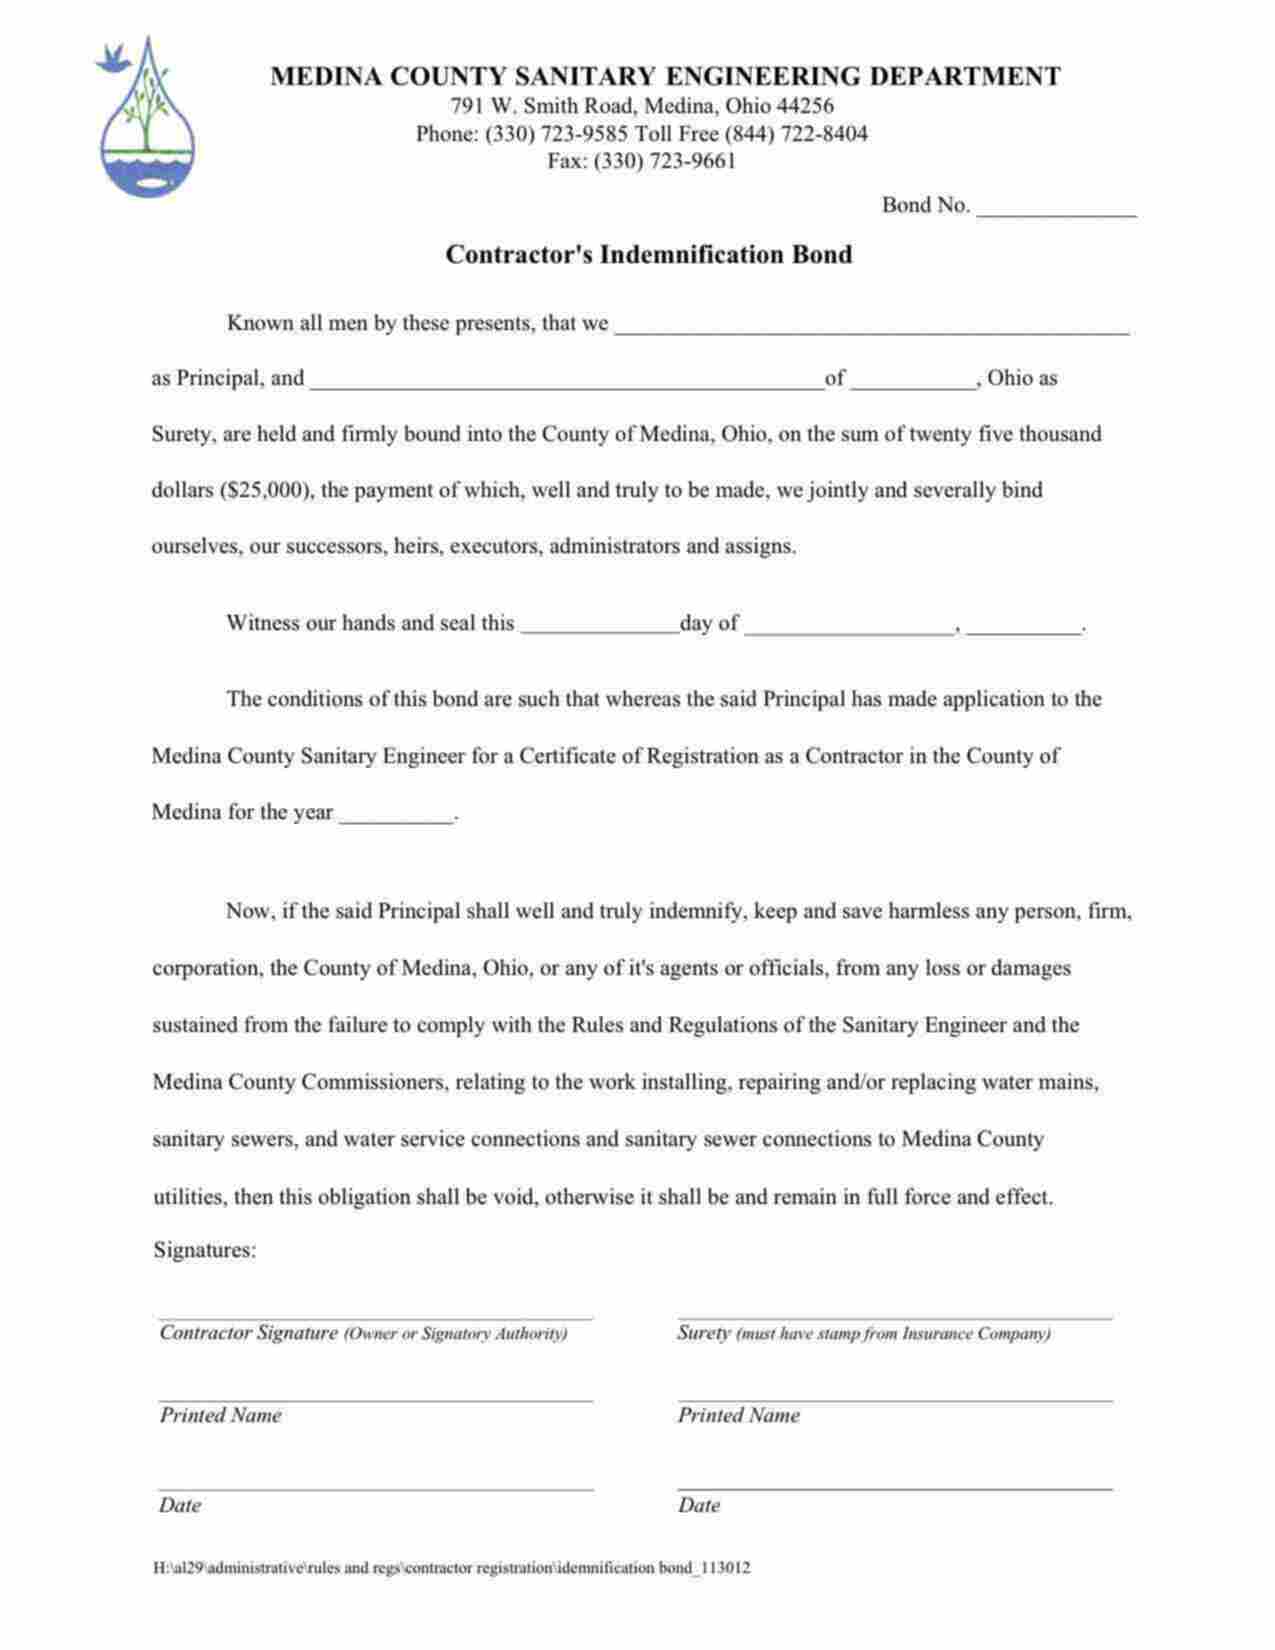 Ohio Contractor's Indemnification Bond Form